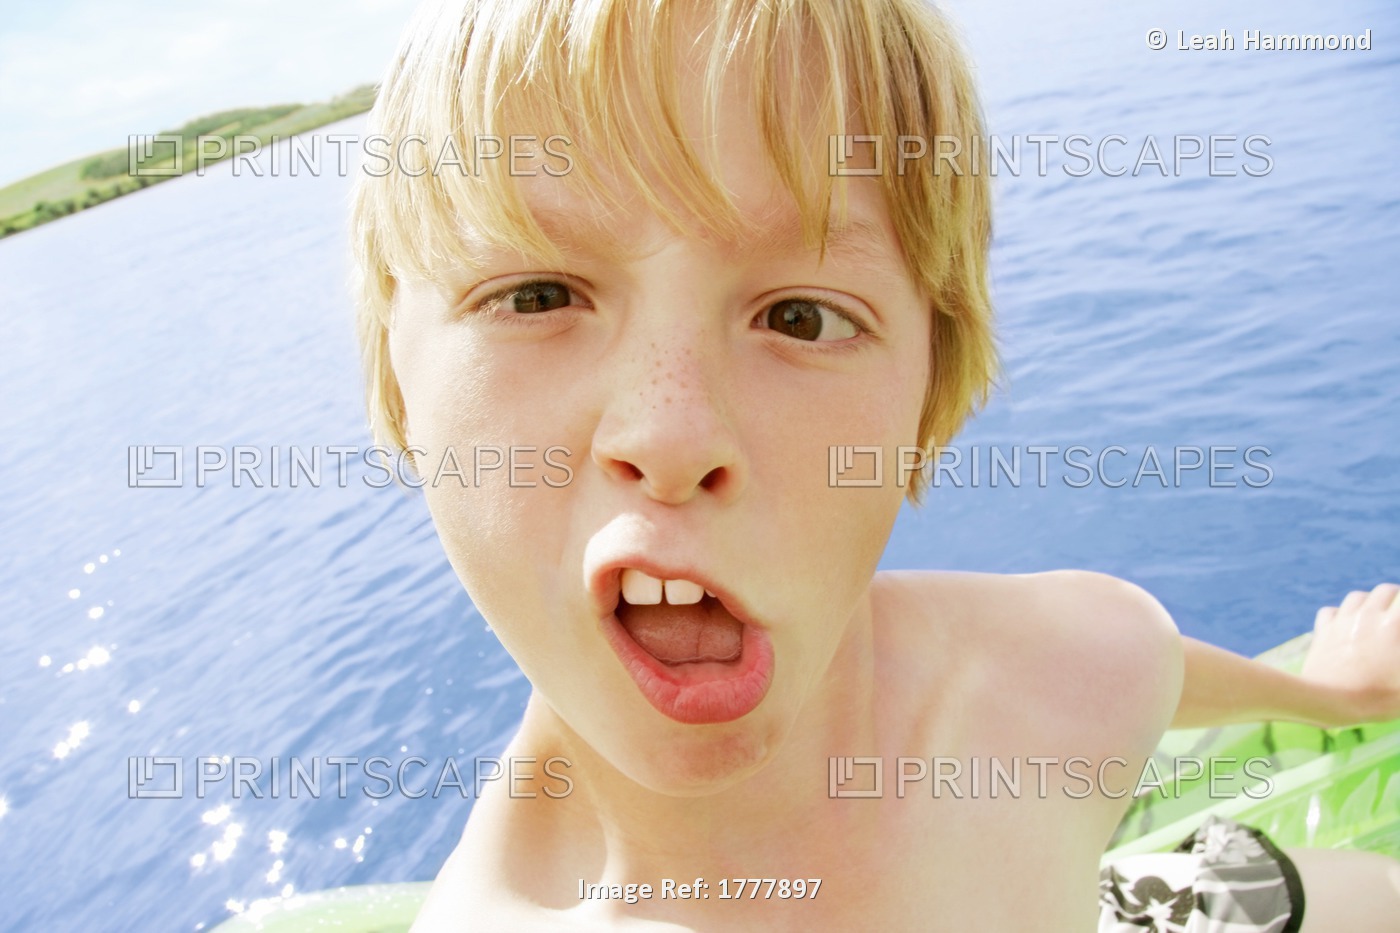 A Young Boy Making A Funny Face